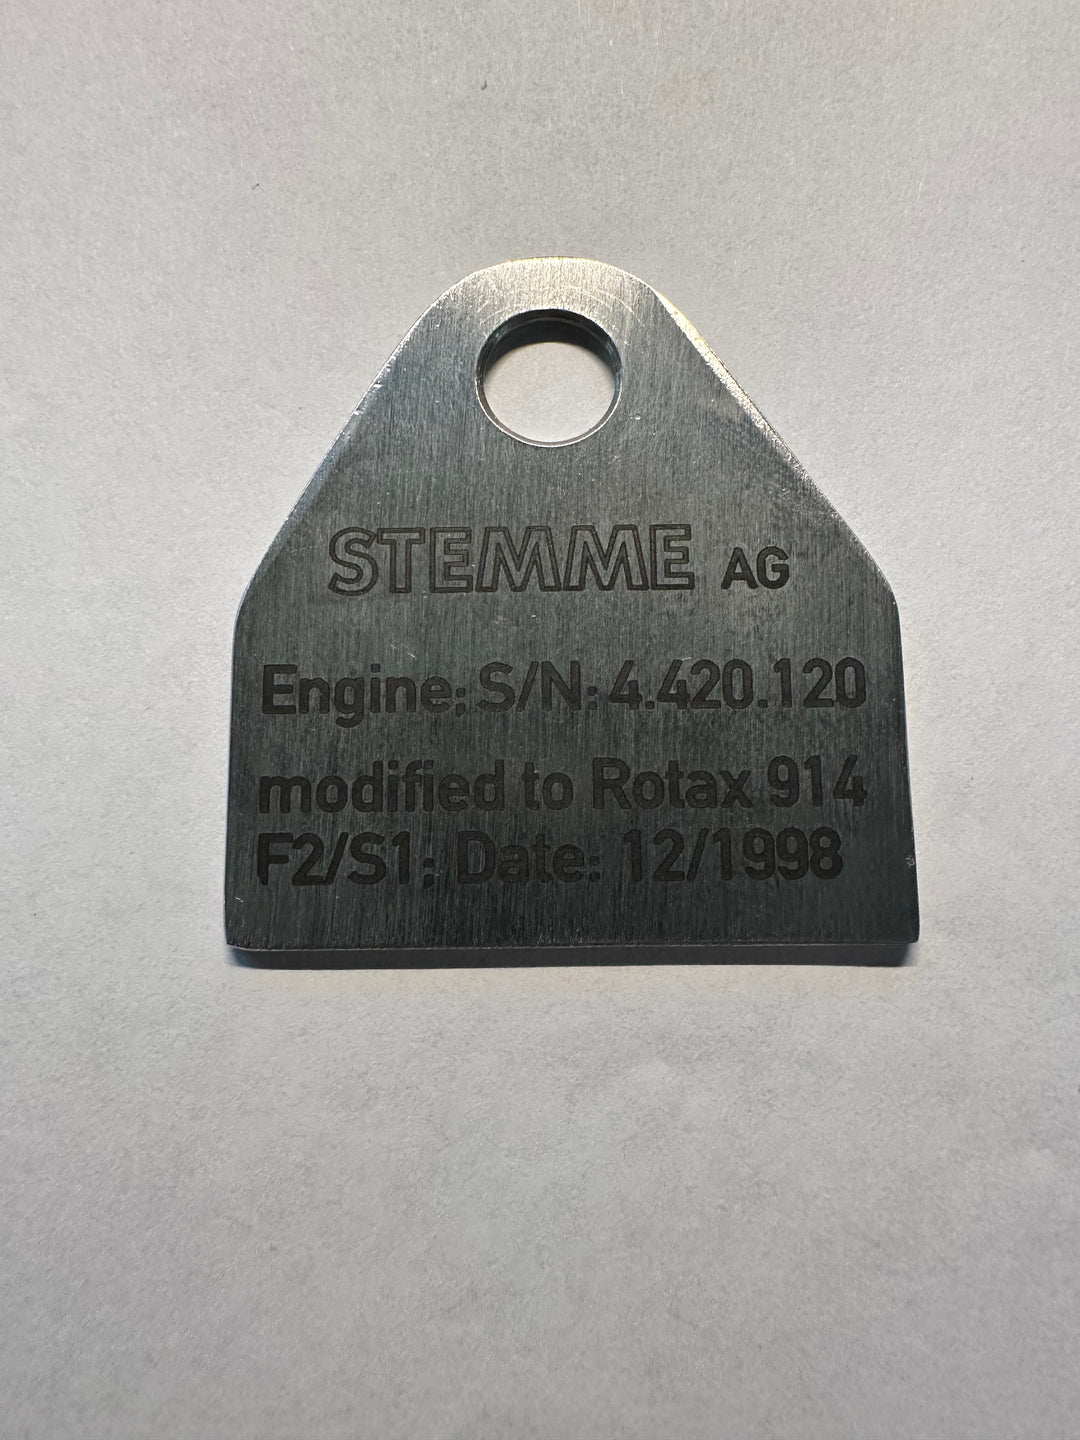 Rotax 914 F2/S1 Data Plate